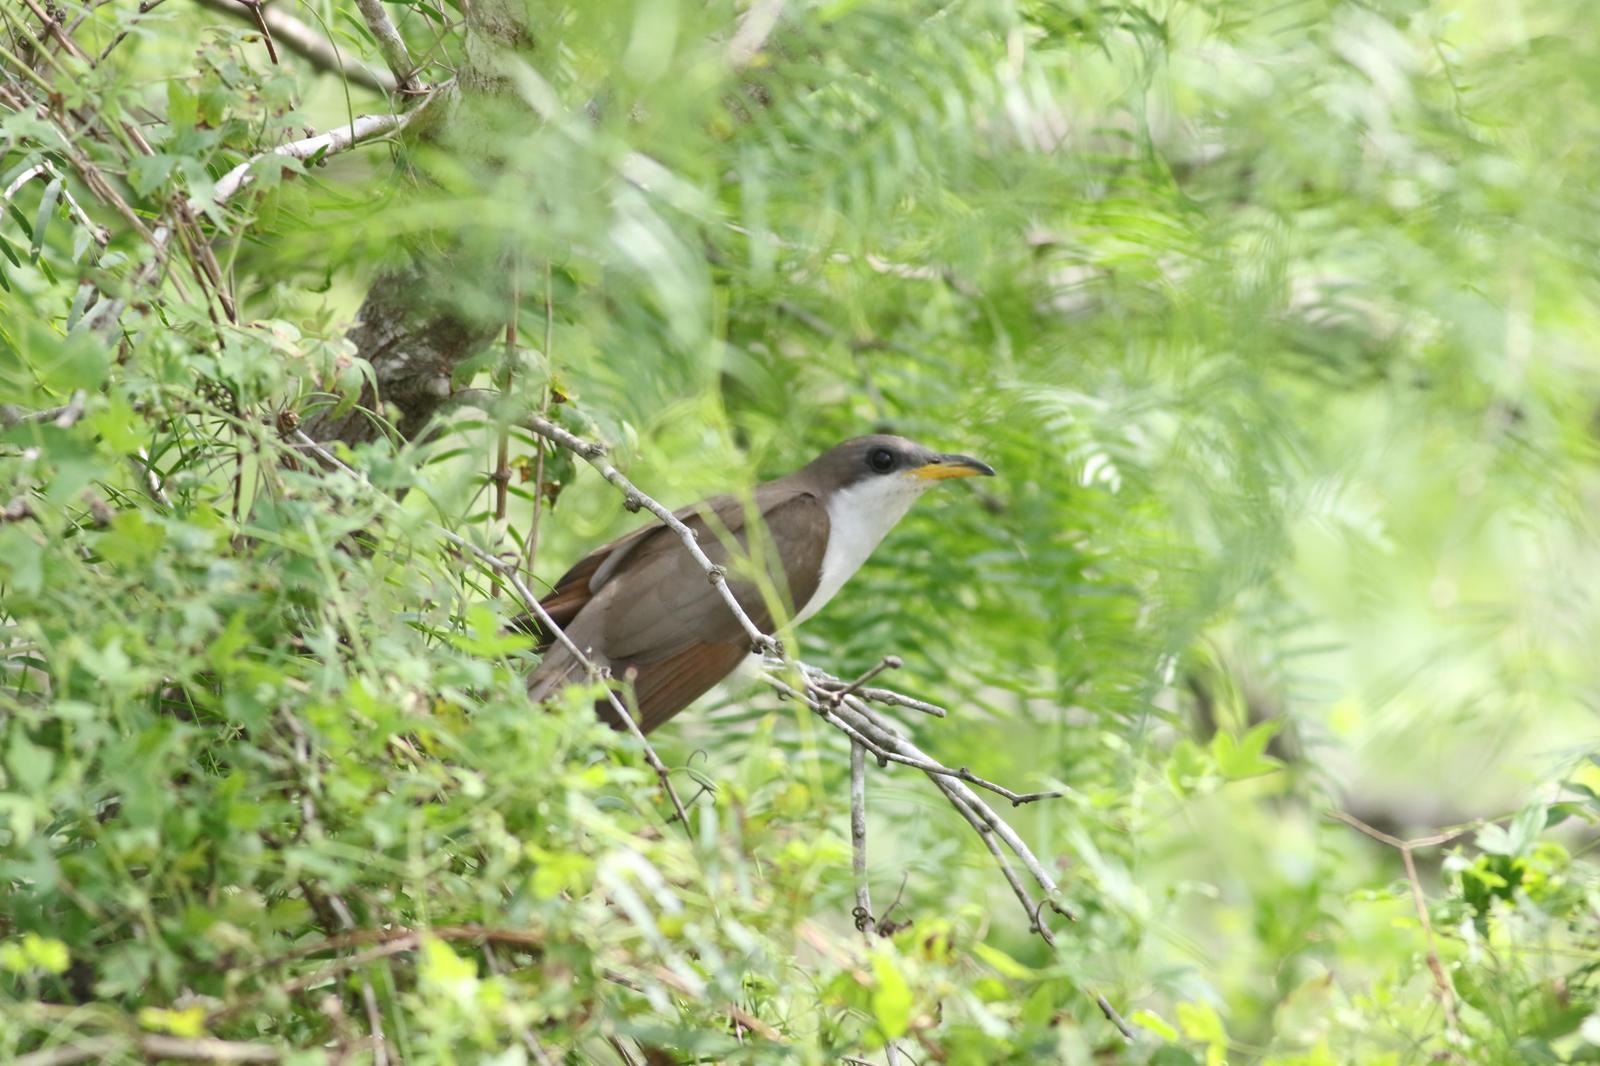 Yellow-billed Cuckoo Photo by Tom Ford-Hutchinson